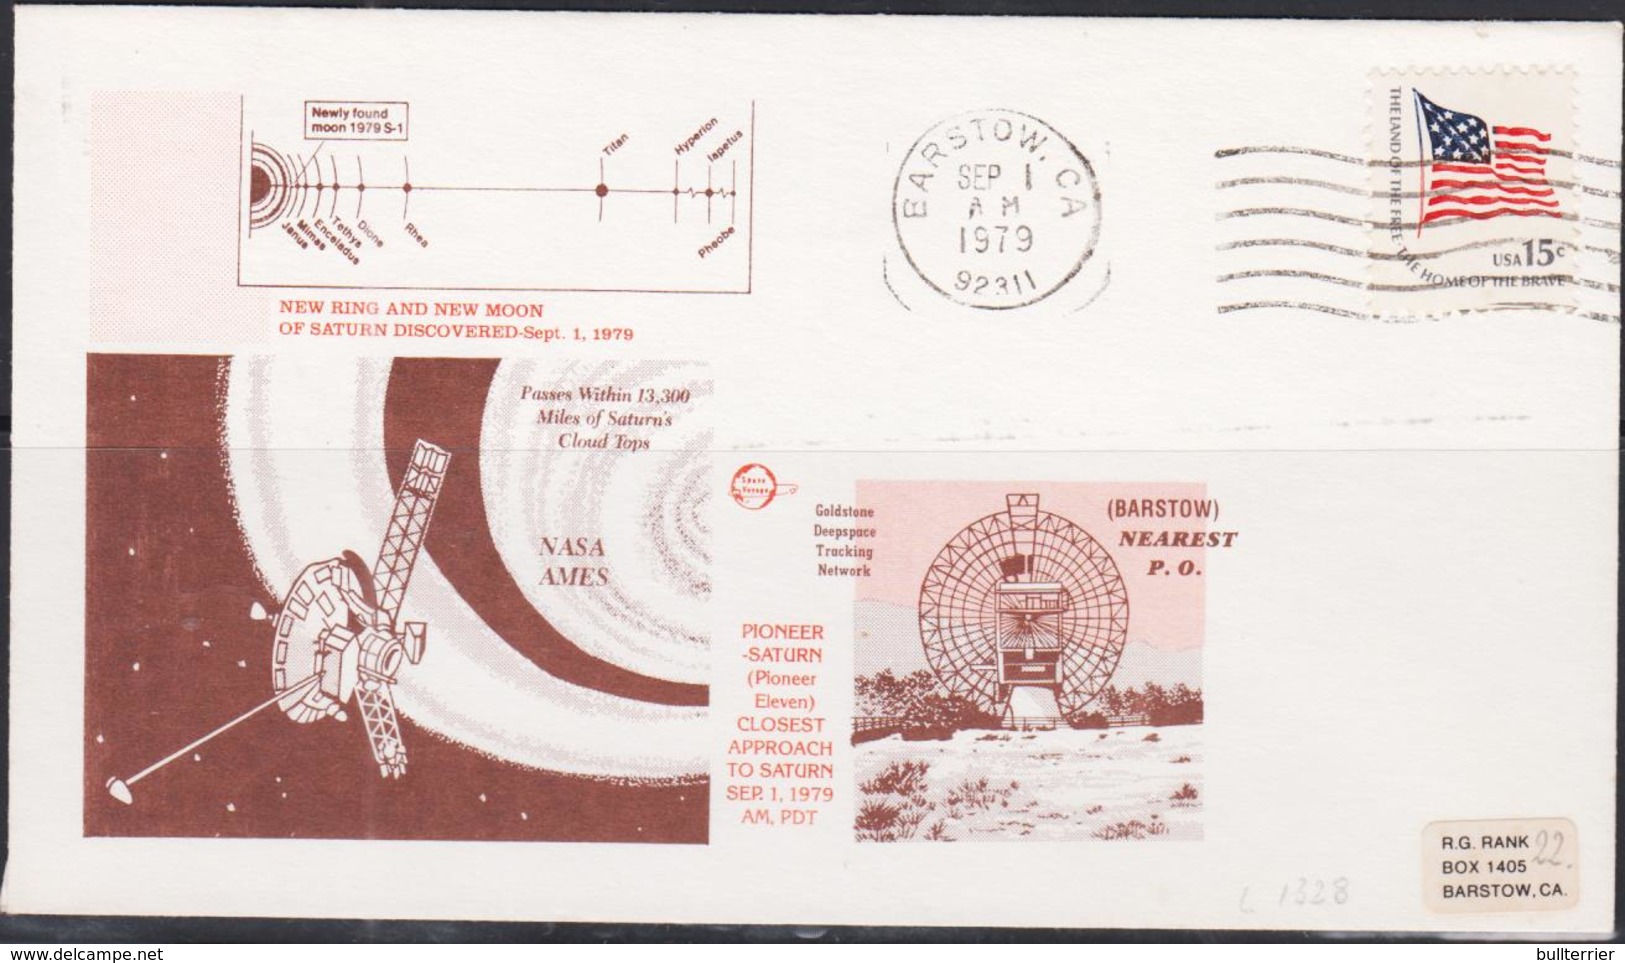 SPACE  - USA-   1979 NASA AMES  SATURN 1ST PICTURES ILLUSTRATED  COVER WITH BARSTOW POSTMARK  AUG 26  1979 - United States